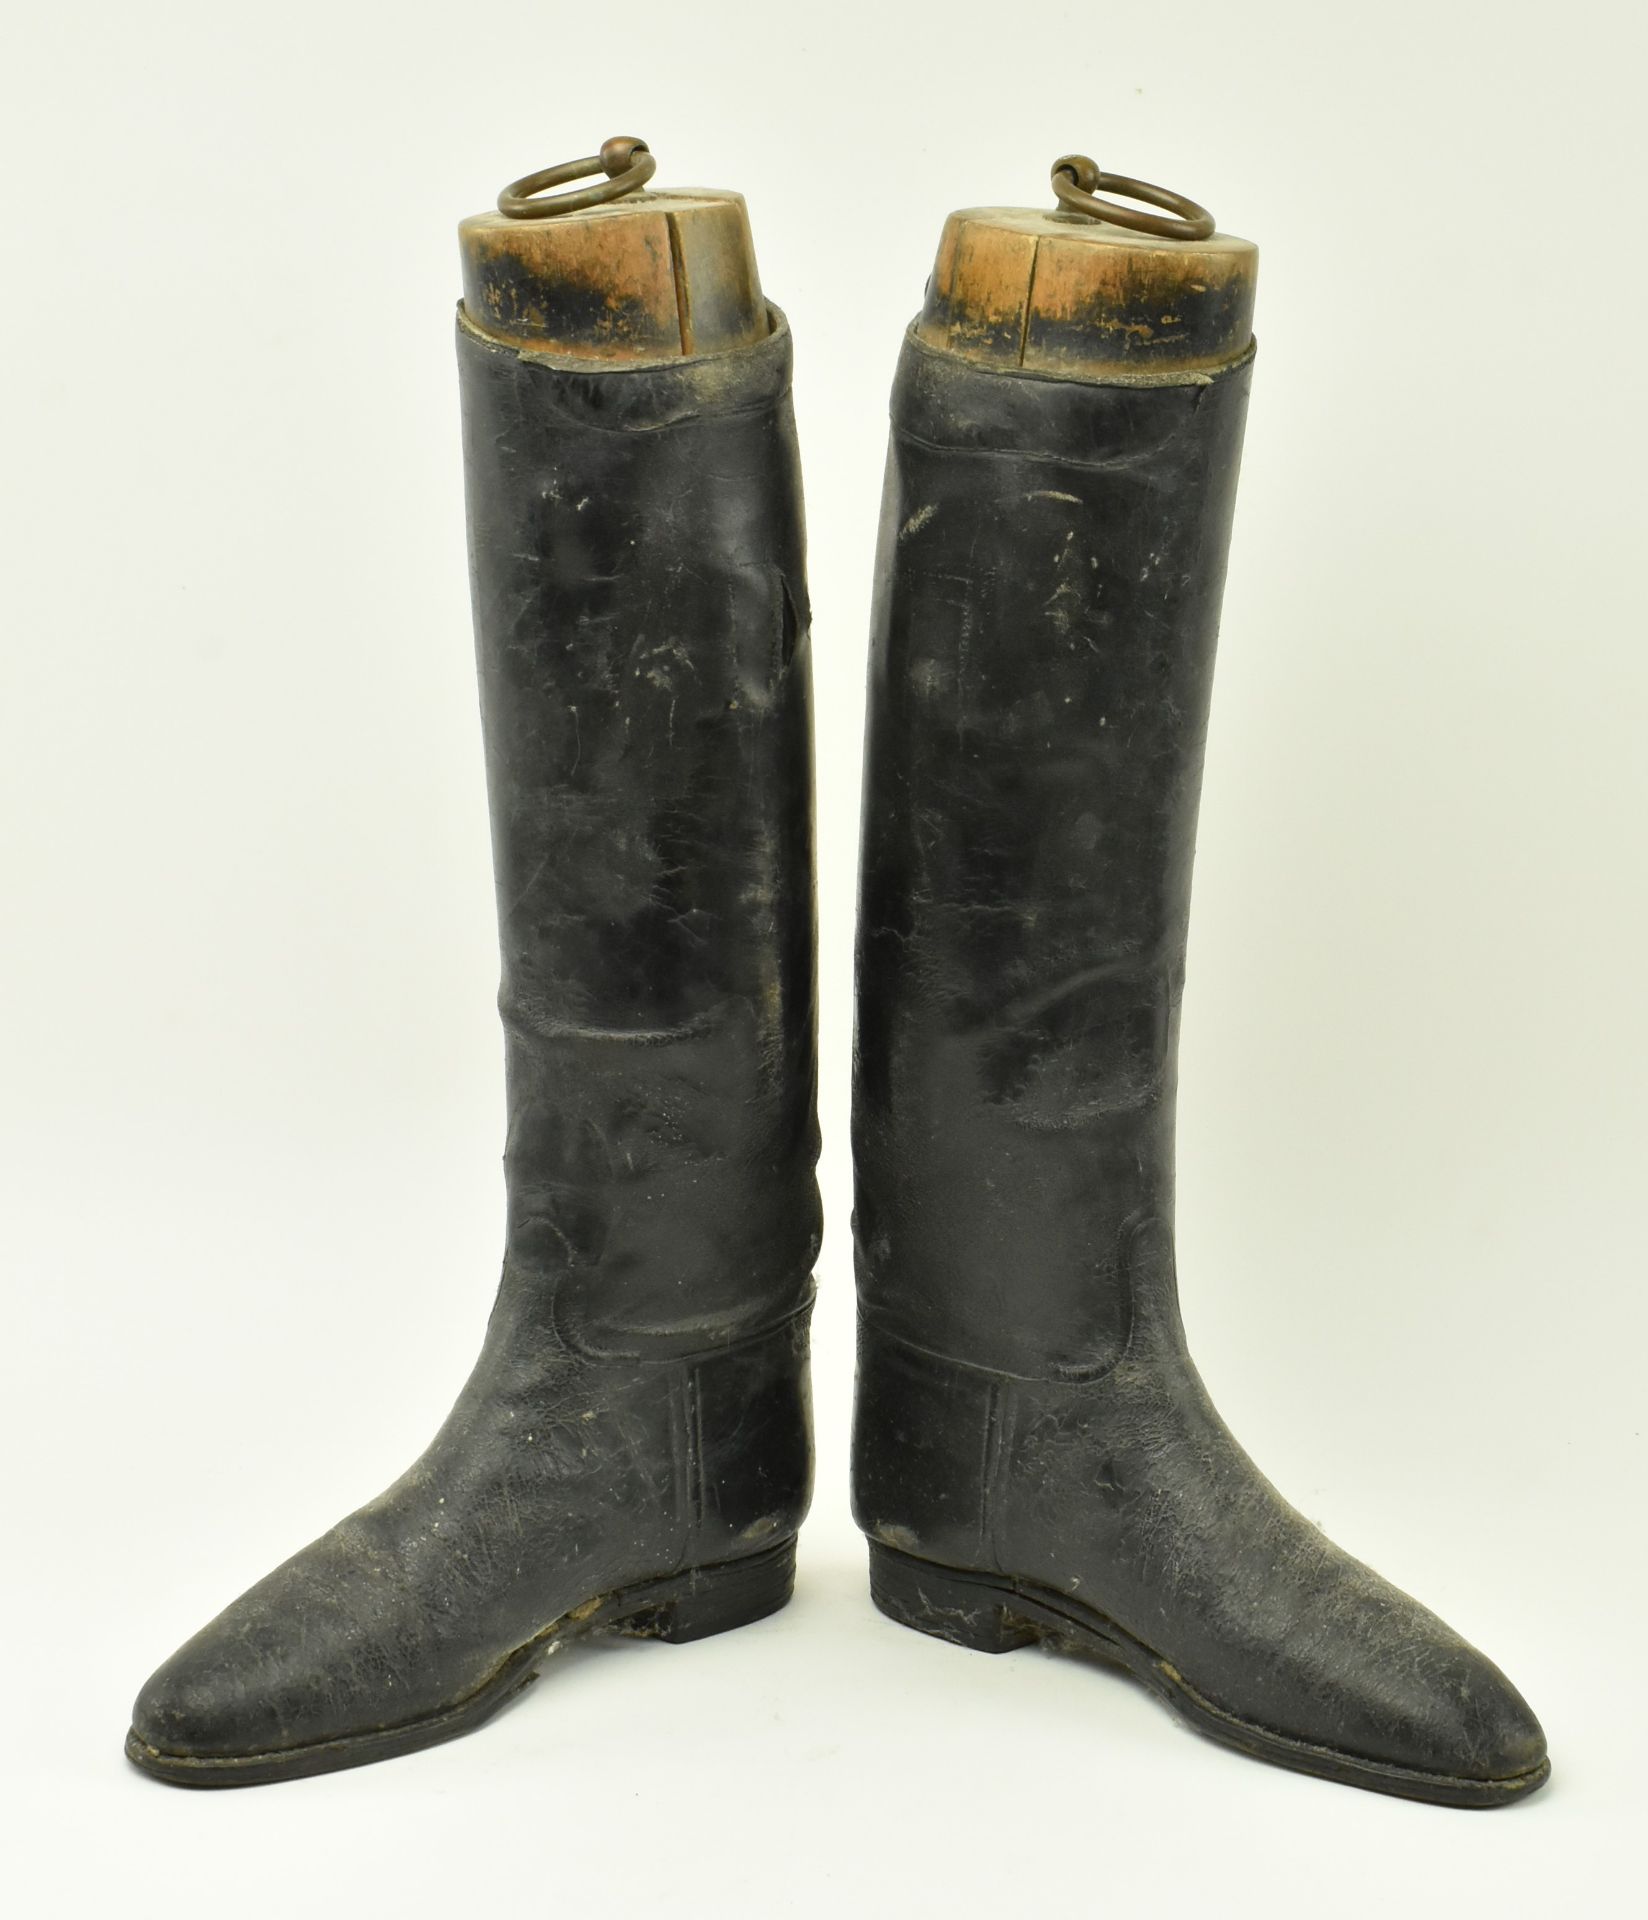 PAIR OF 20TH CENTURY BLACK LEATHER RIDING BOOTS AND TREES - Image 2 of 6